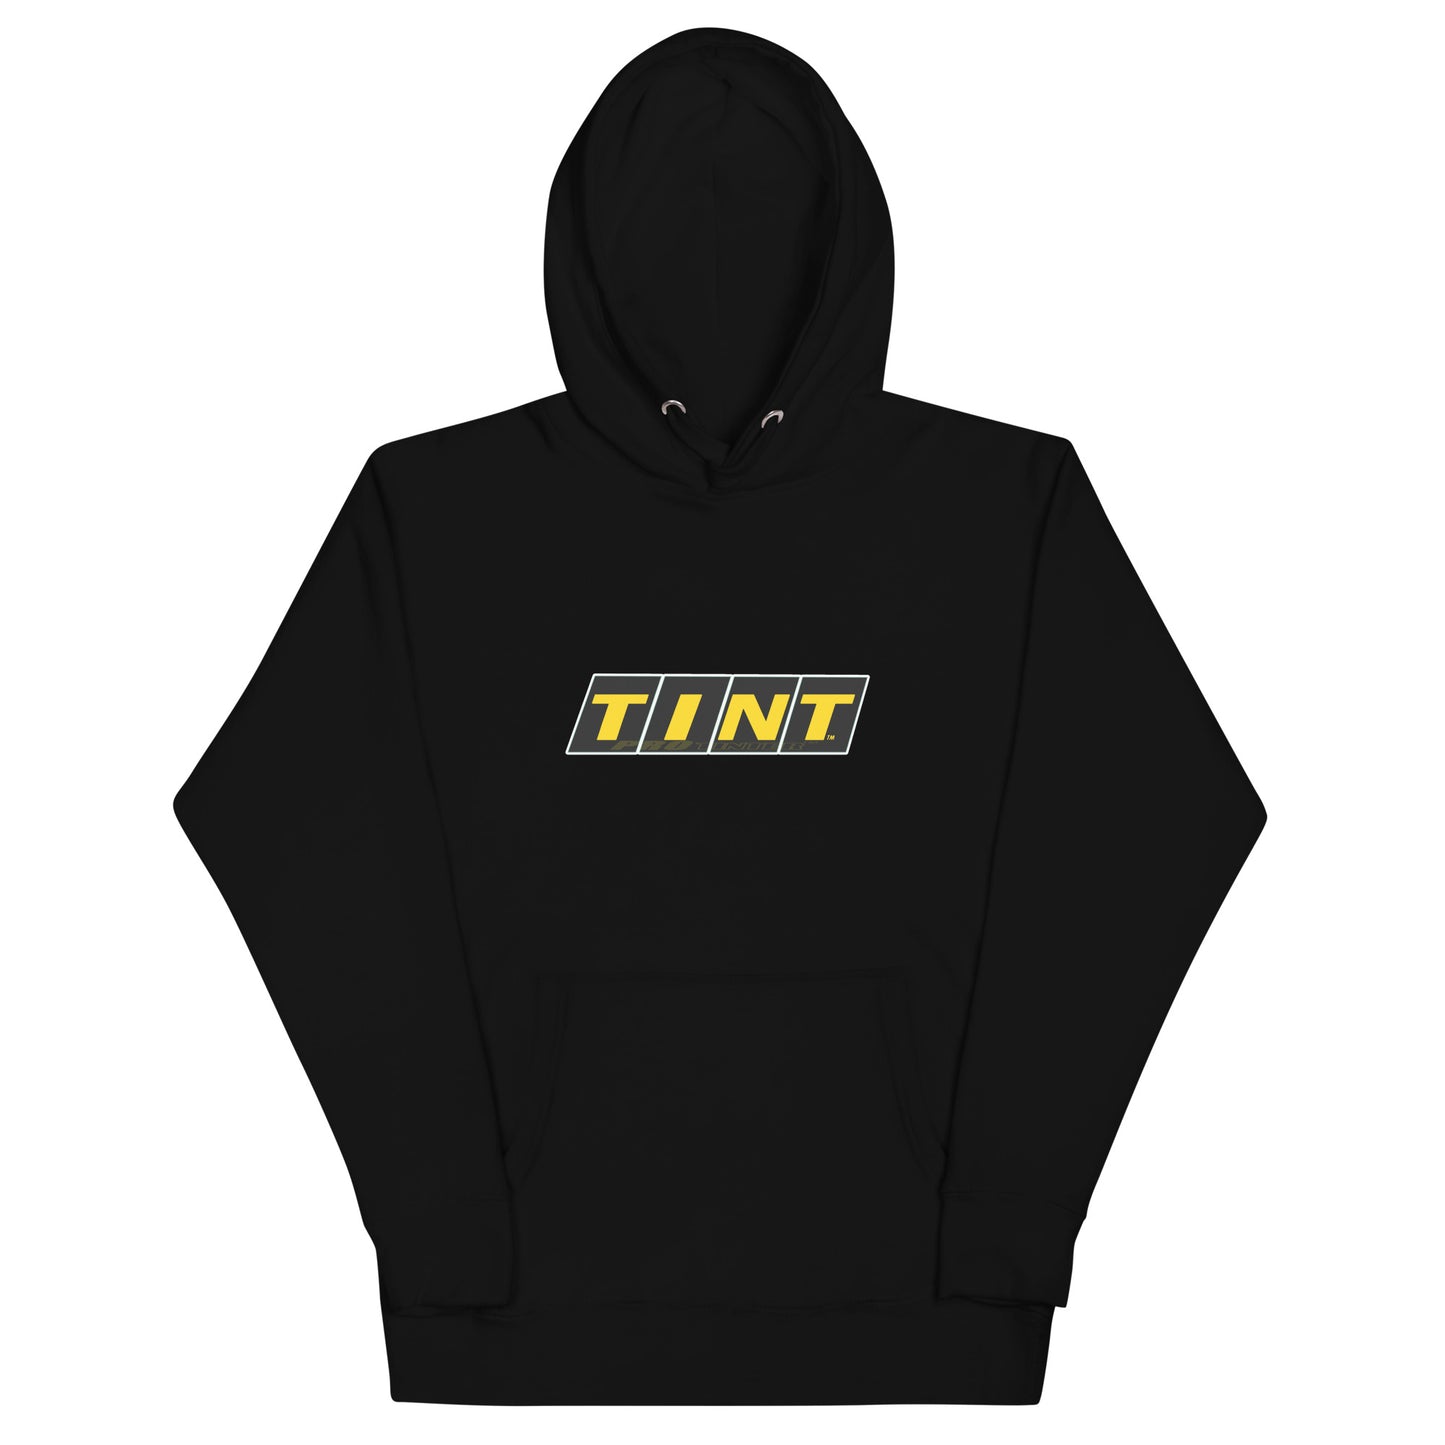 TINT by Pro Tinter Unisex Hoodie